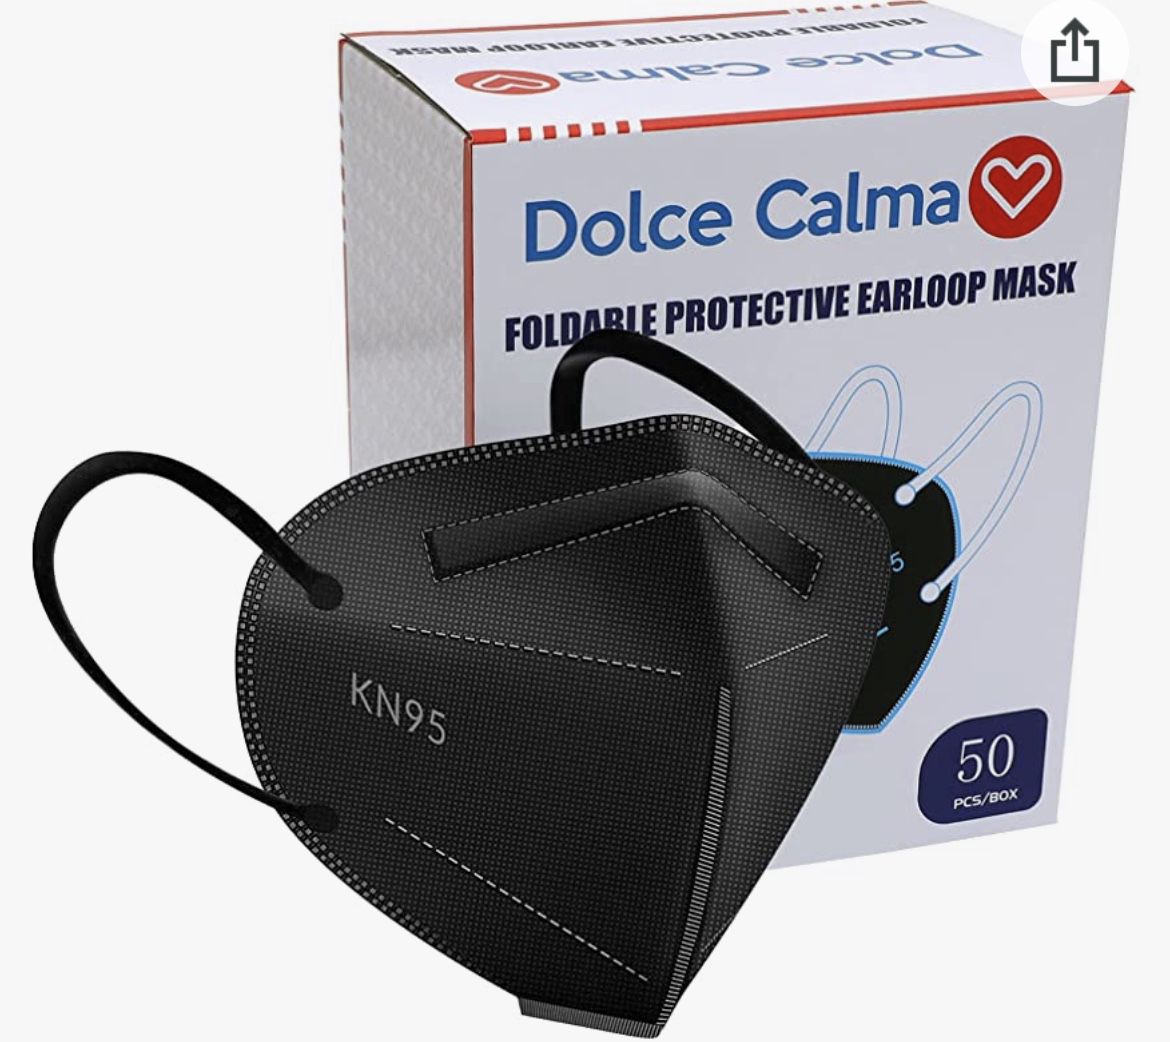 Dolce Calma KN95 Face Mask 50 Pack,-Layer Filtration Cup Dust Filter Coverfor Men & Women, Individually Wrapped, Breath